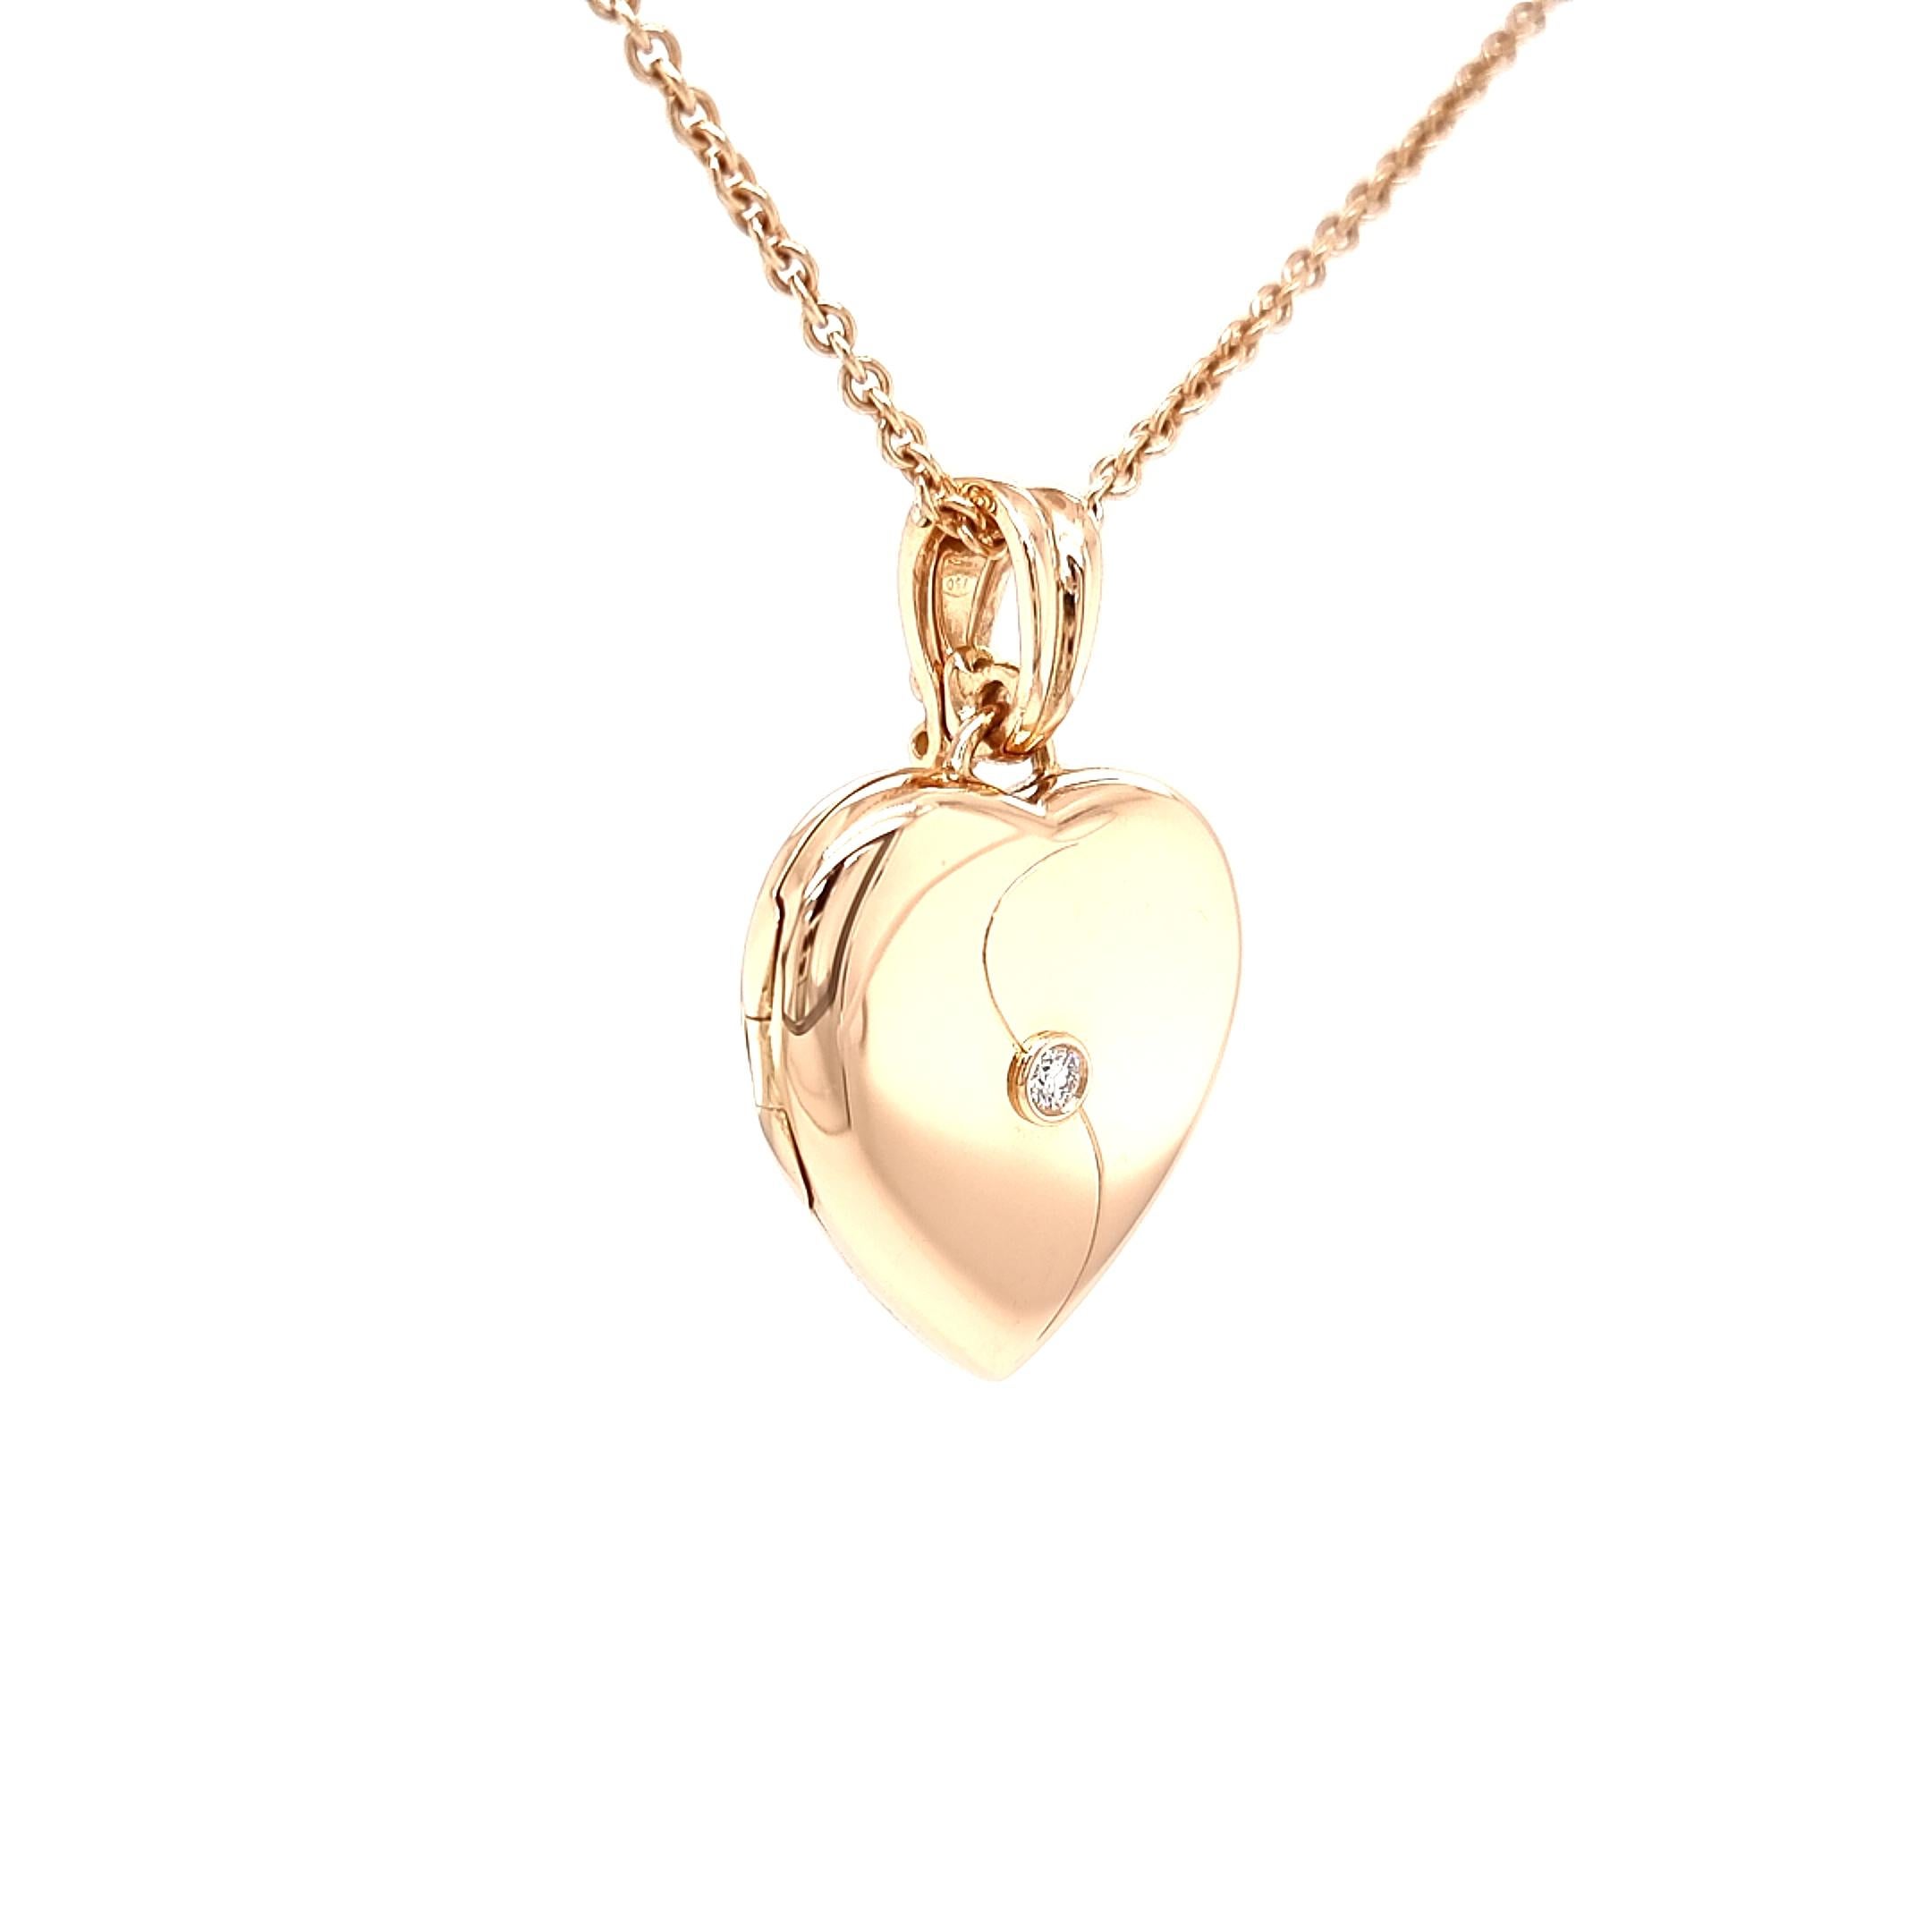 Victor Mayer customizable heart shaped pendant locket 18k yellow gold, Hallmark collection, 1 diamond, total 0.06 ct, H VS, measurements app. 23.0 mm x 25.0 mm

About the creator Victor Mayer
Victor Mayer is internationally renowned for elegant